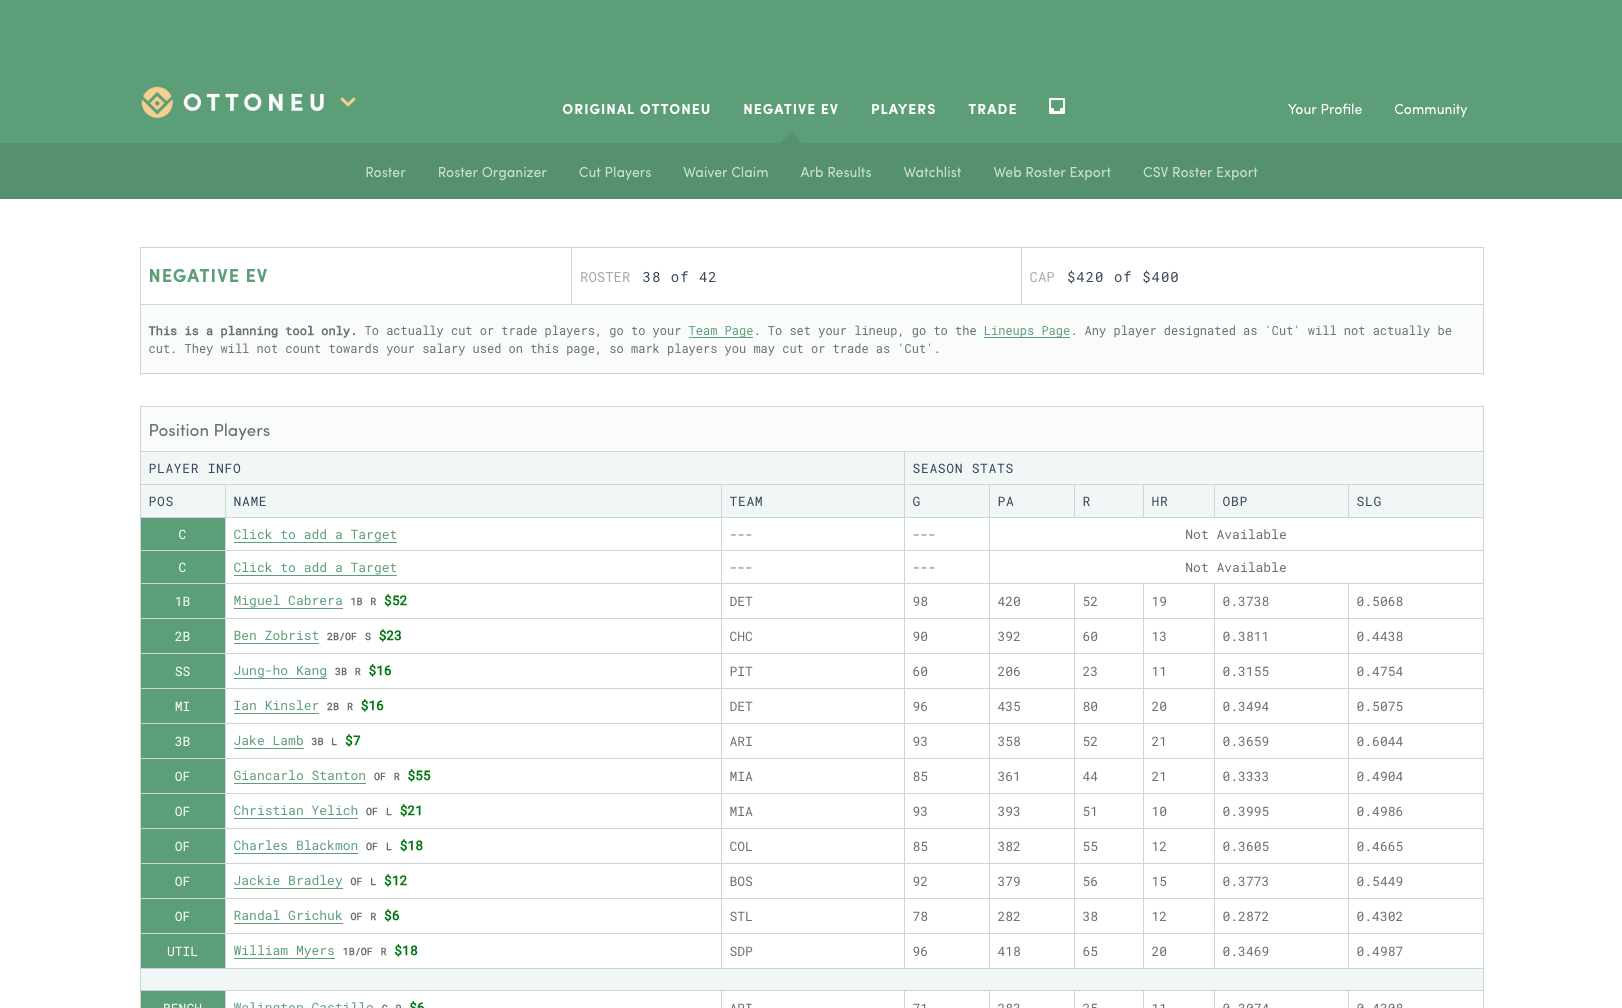 A screenshot of the baseball team page with a table of players and stats